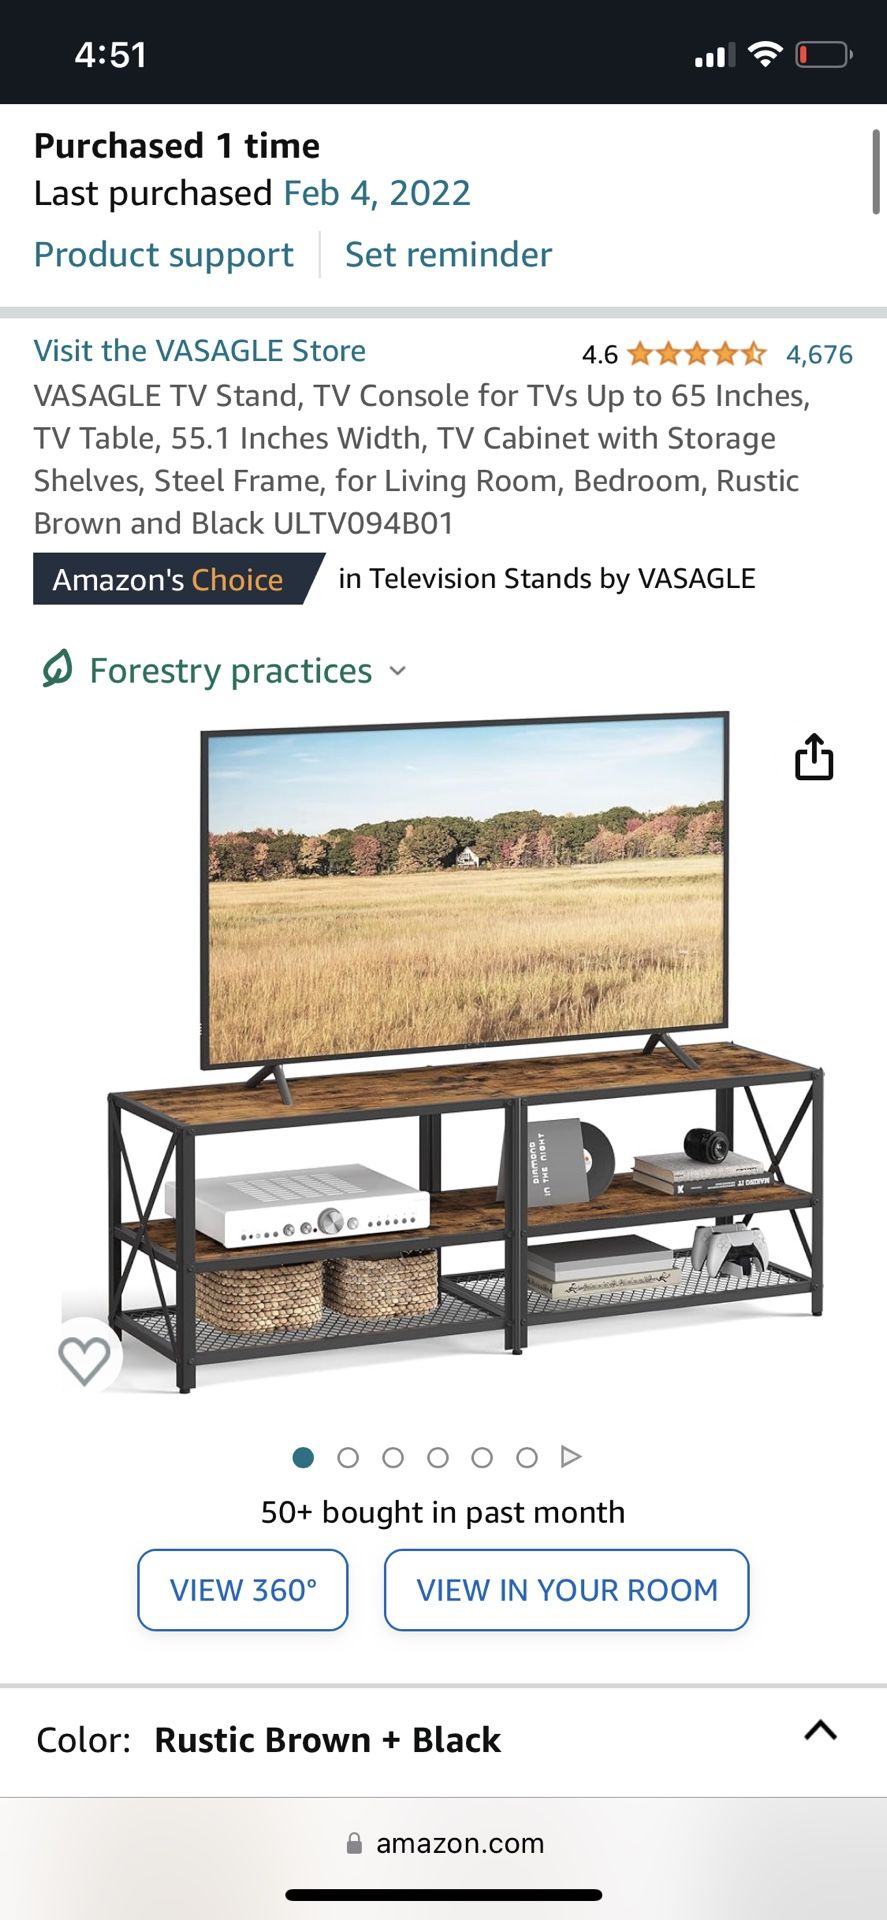 VASAGLE TV Stand, TV Console for TVs Up to 65 Inches, TV Table, 55.1 Inches Width, TV Cabinet with Storage Shelves, Steel Frame, for Living Room, Bedr